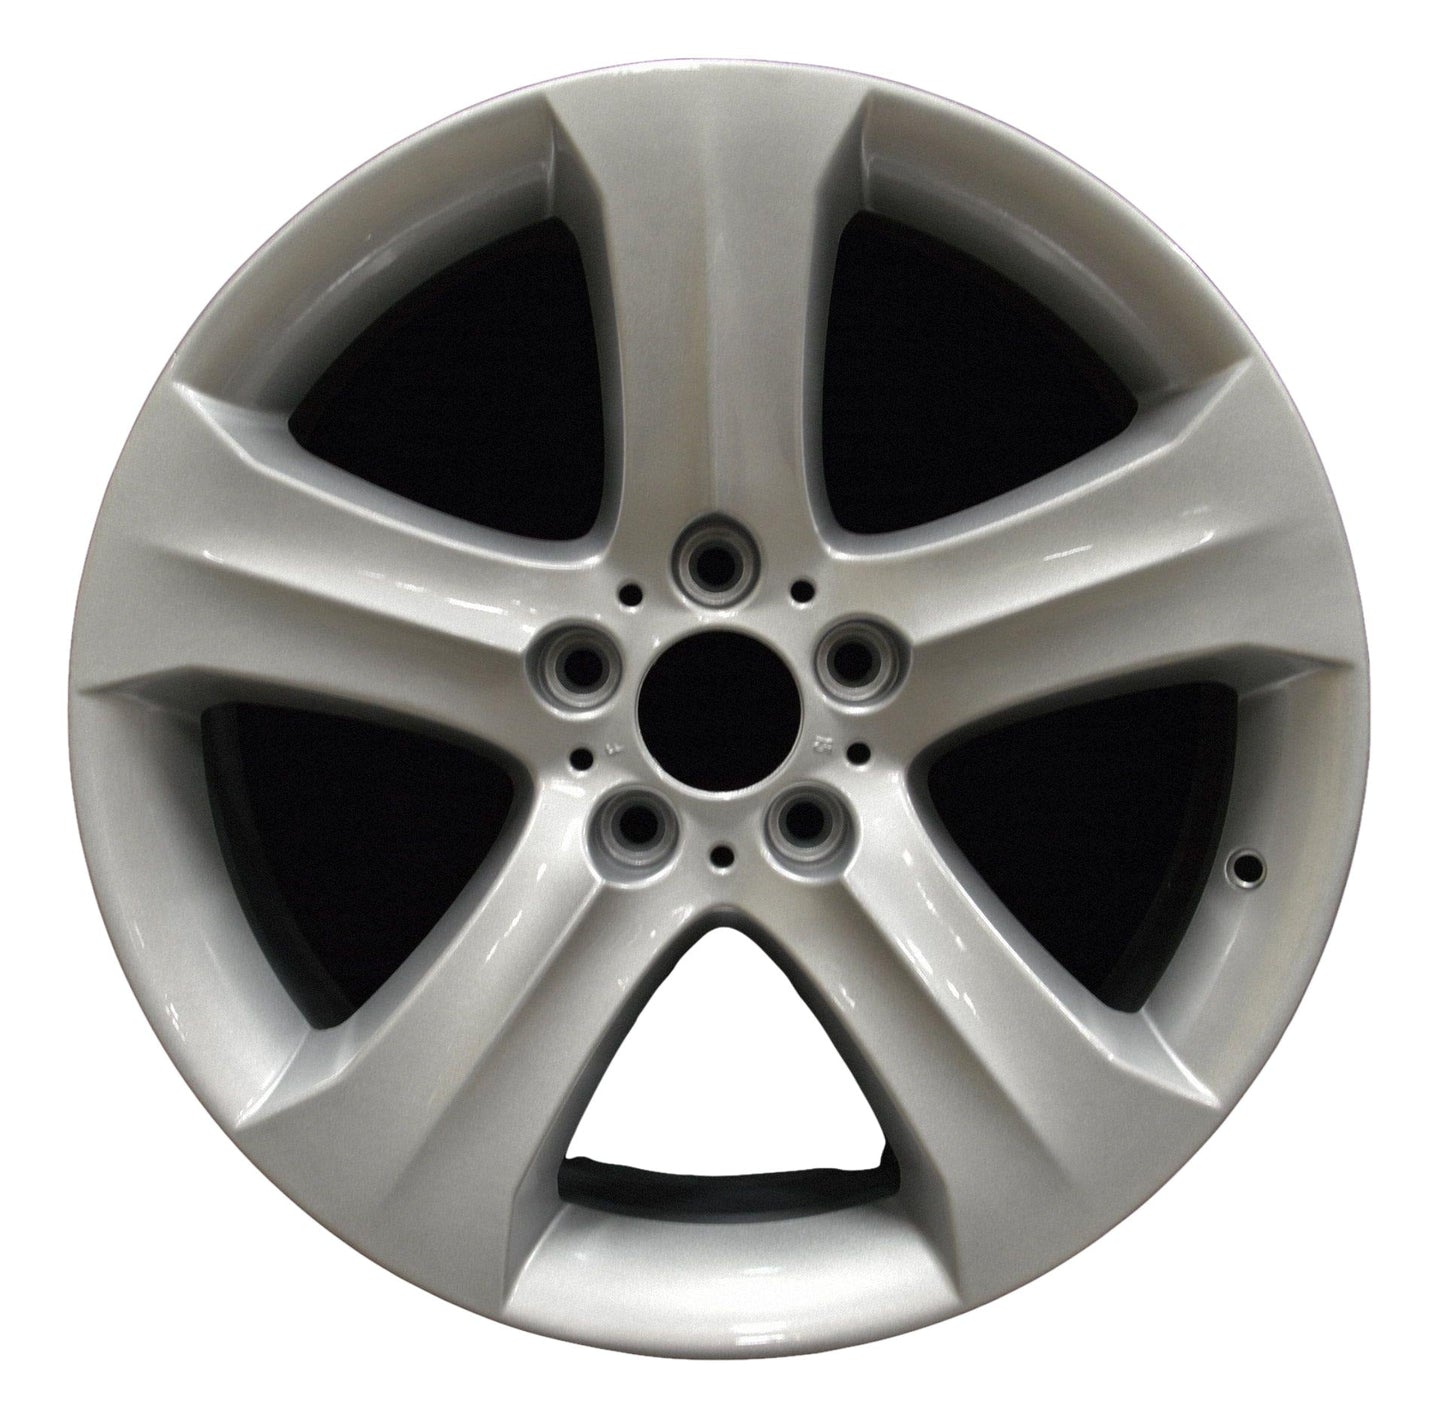 BMW X6  2008, 2009, 2010, 2011, 2012, 2013, 2014 Factory OEM Car Wheel Size 19x9 Alloy WAO.71276FT.PS01.FF